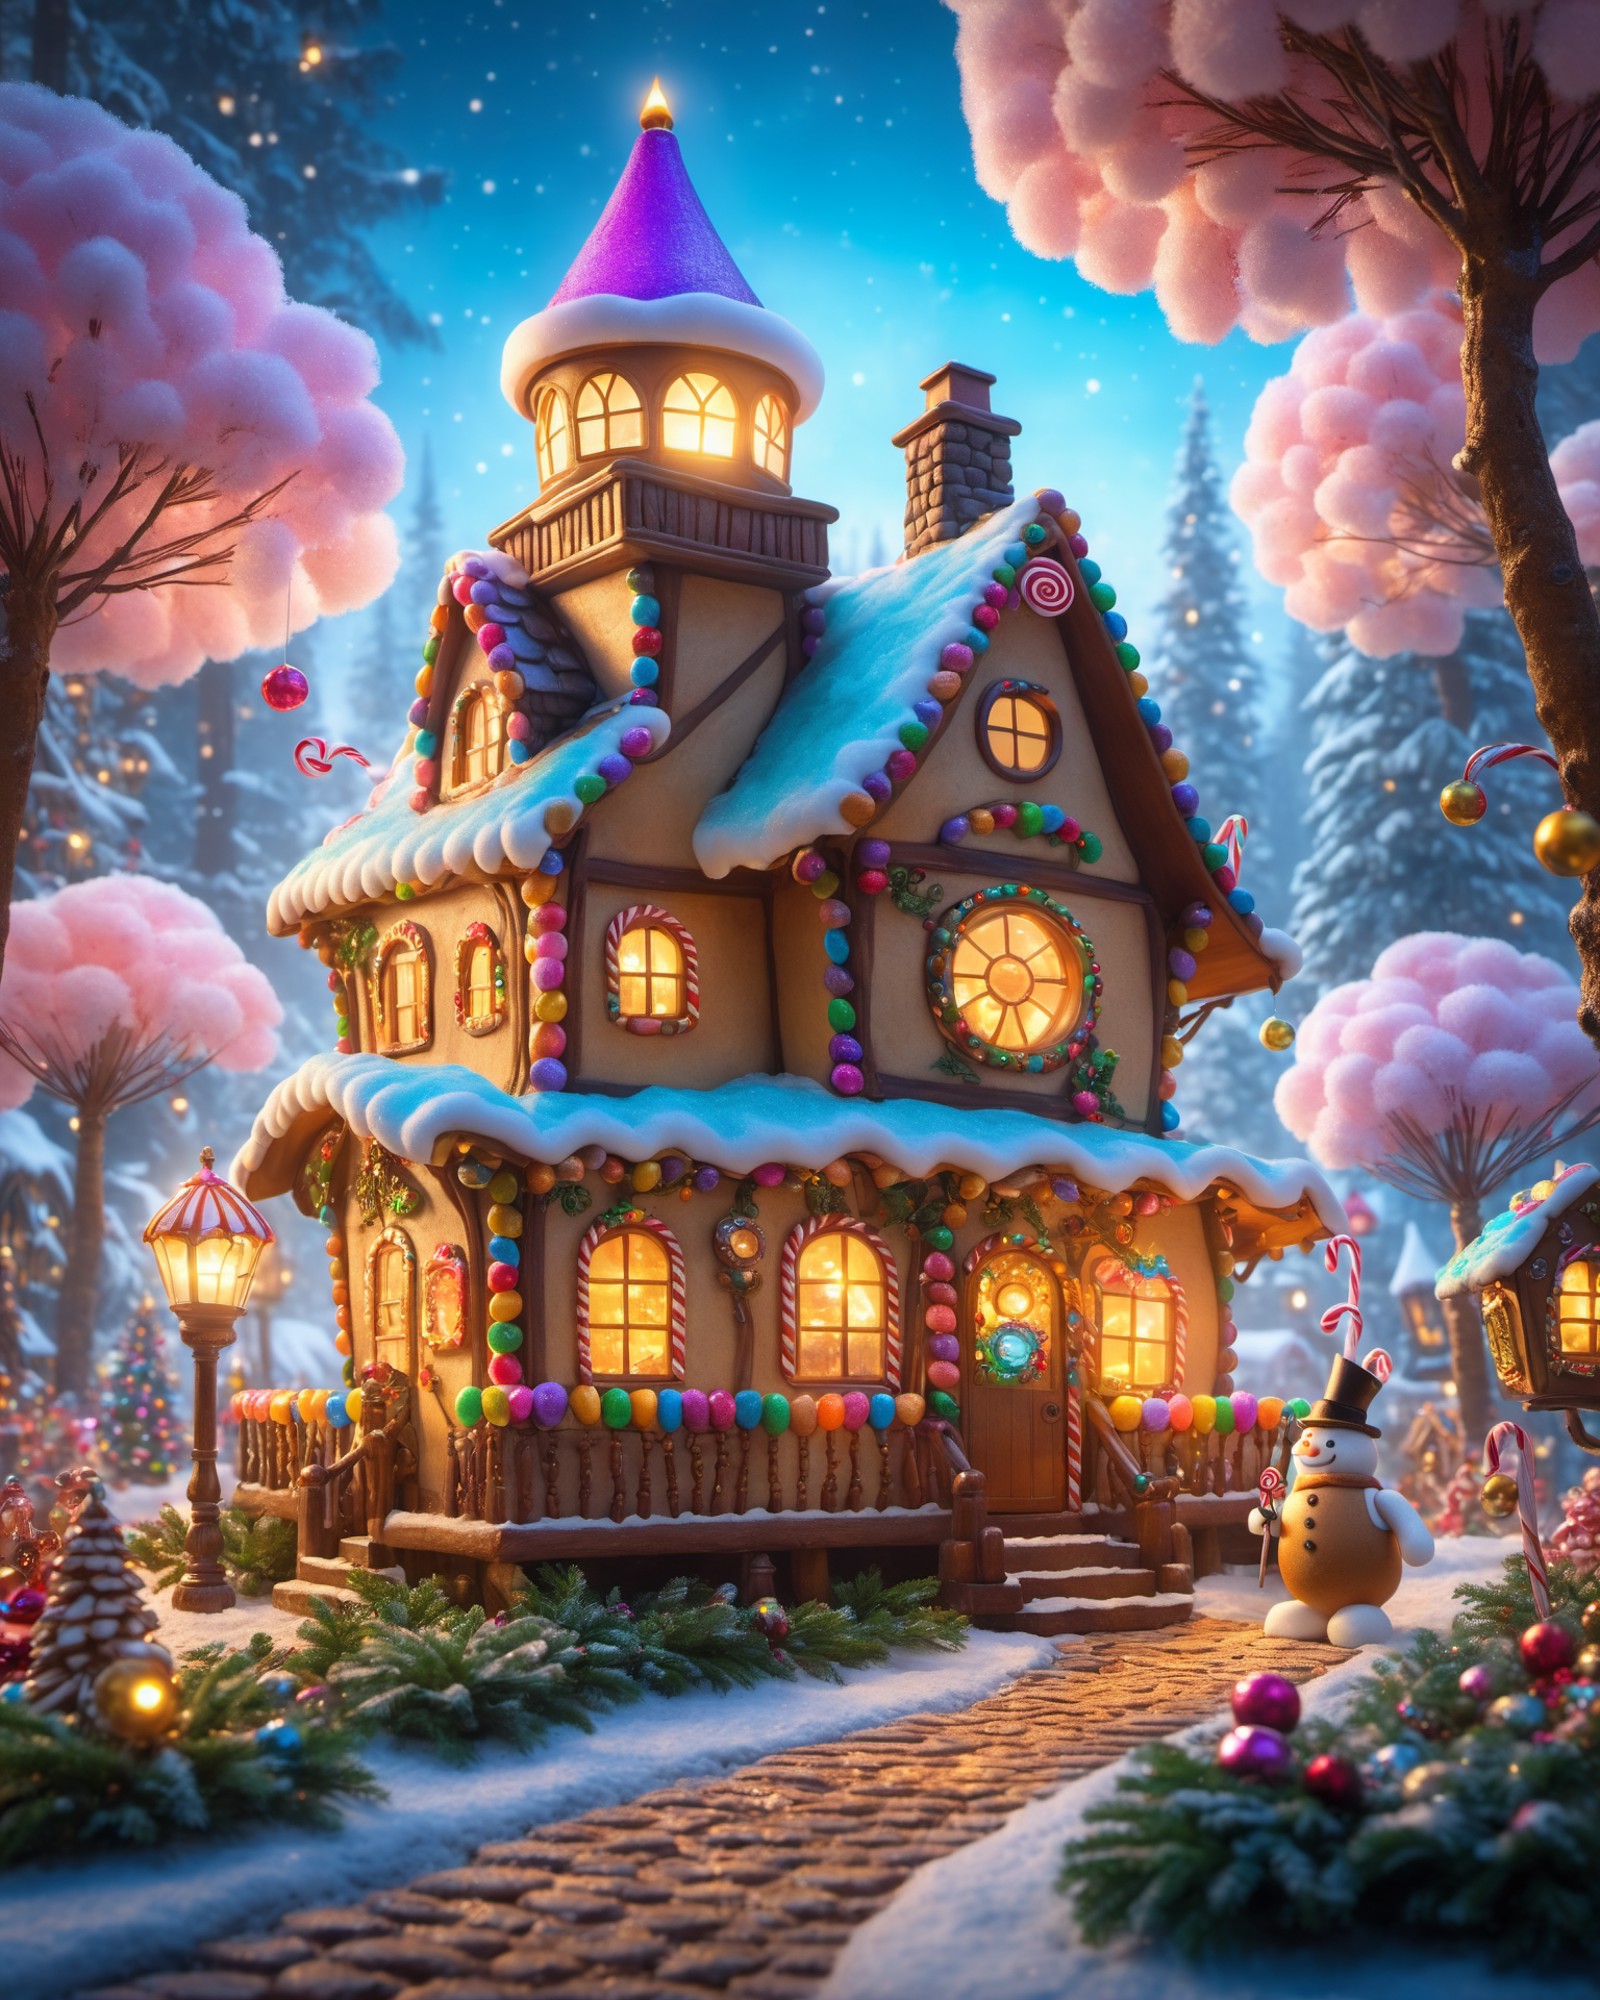 gingerbread candy house, candy cobblestones, gingerbread,  gumdrops, cotton candy, steampunk, cinematic scene, art deco, s...